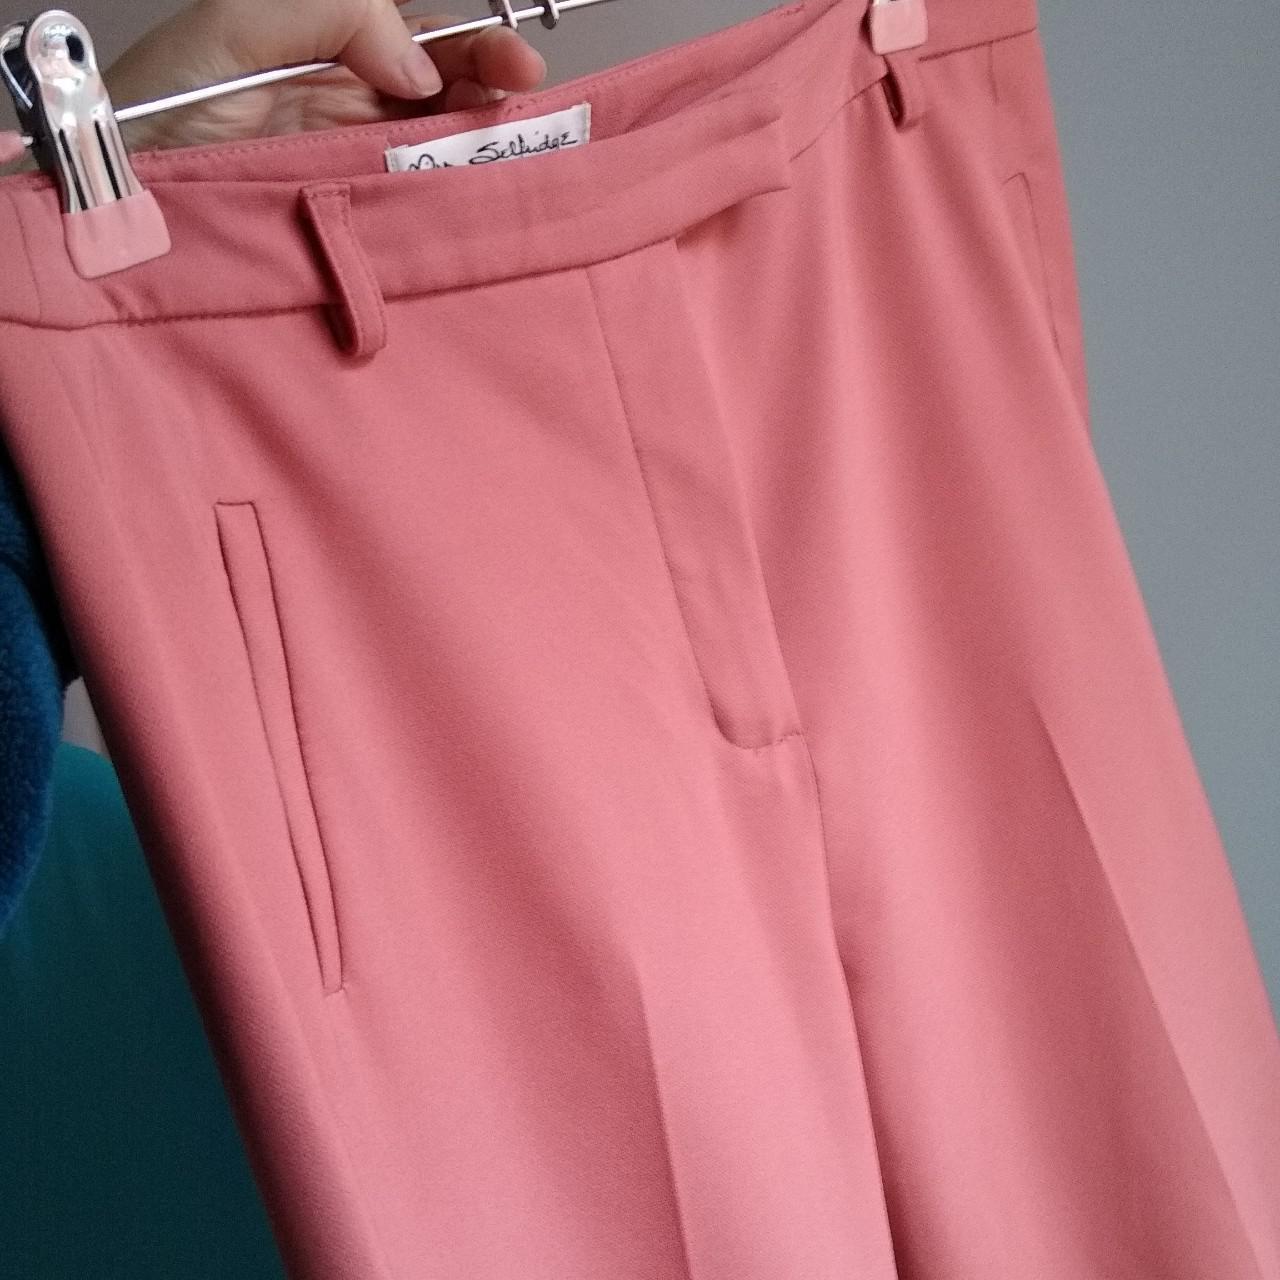 💕 Salmon pink smart formal trousers from Miss... - Depop